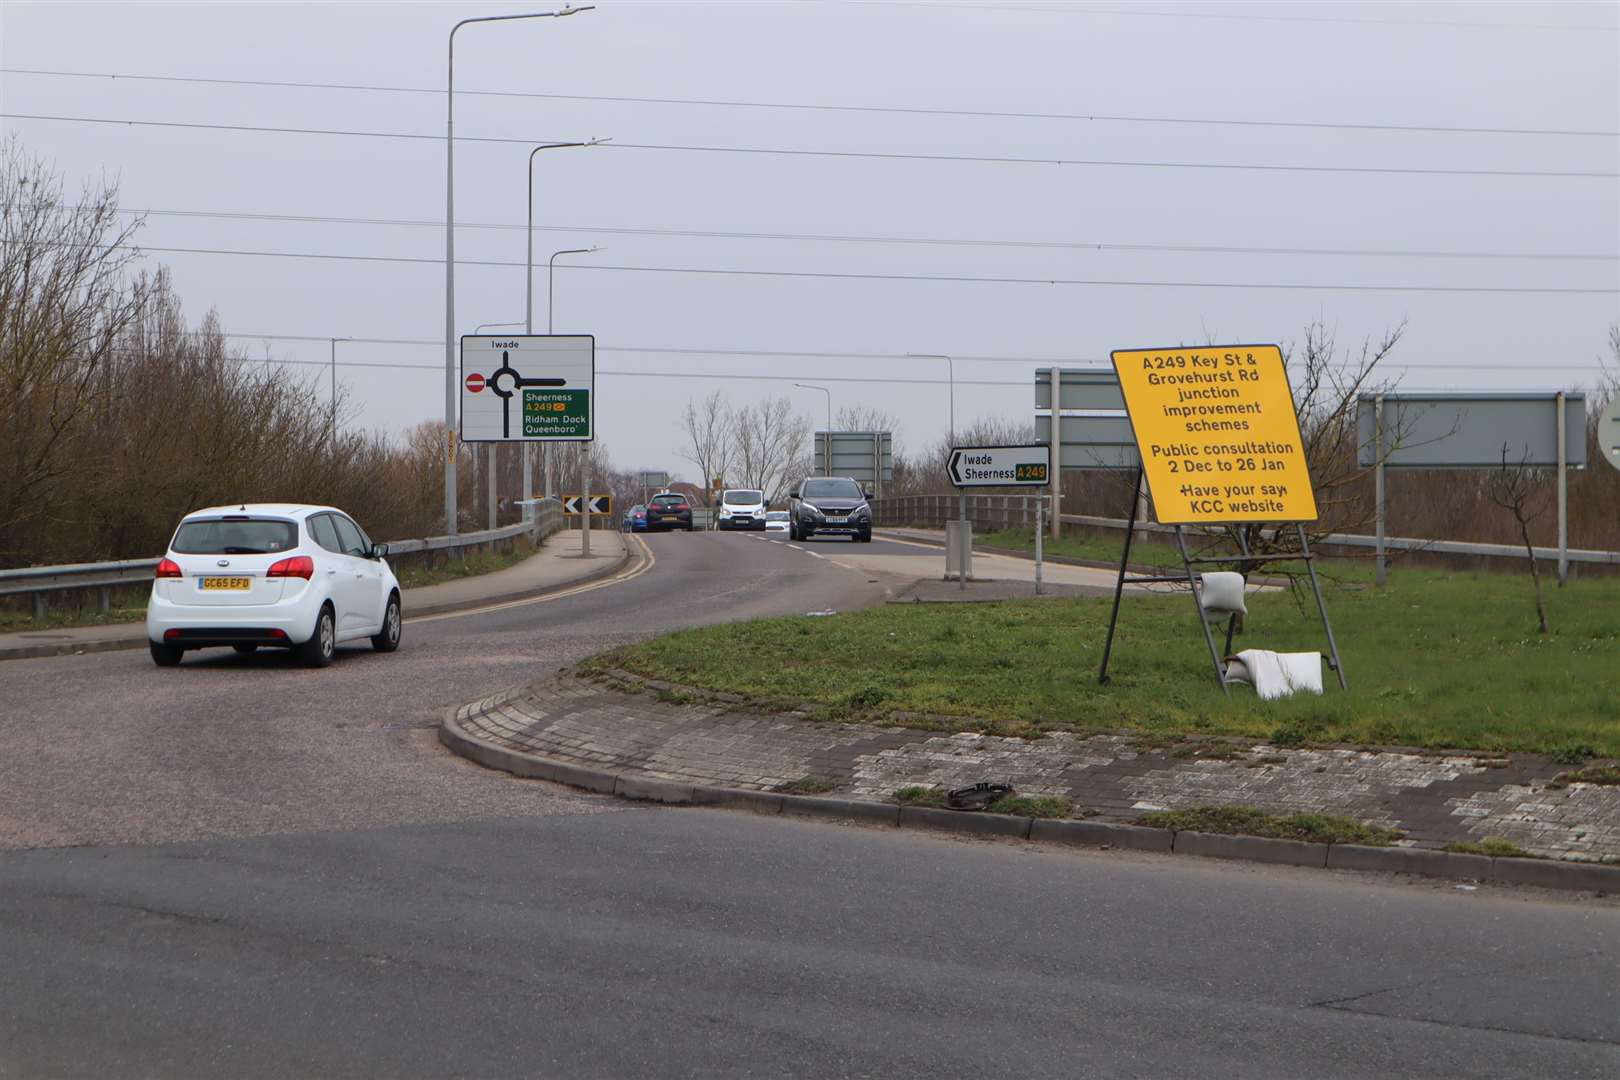 The Grovehurst Roundabout and the bridge over the A249 - a similar bridge is to be built as part of the upgrade. Picture: John Nurden